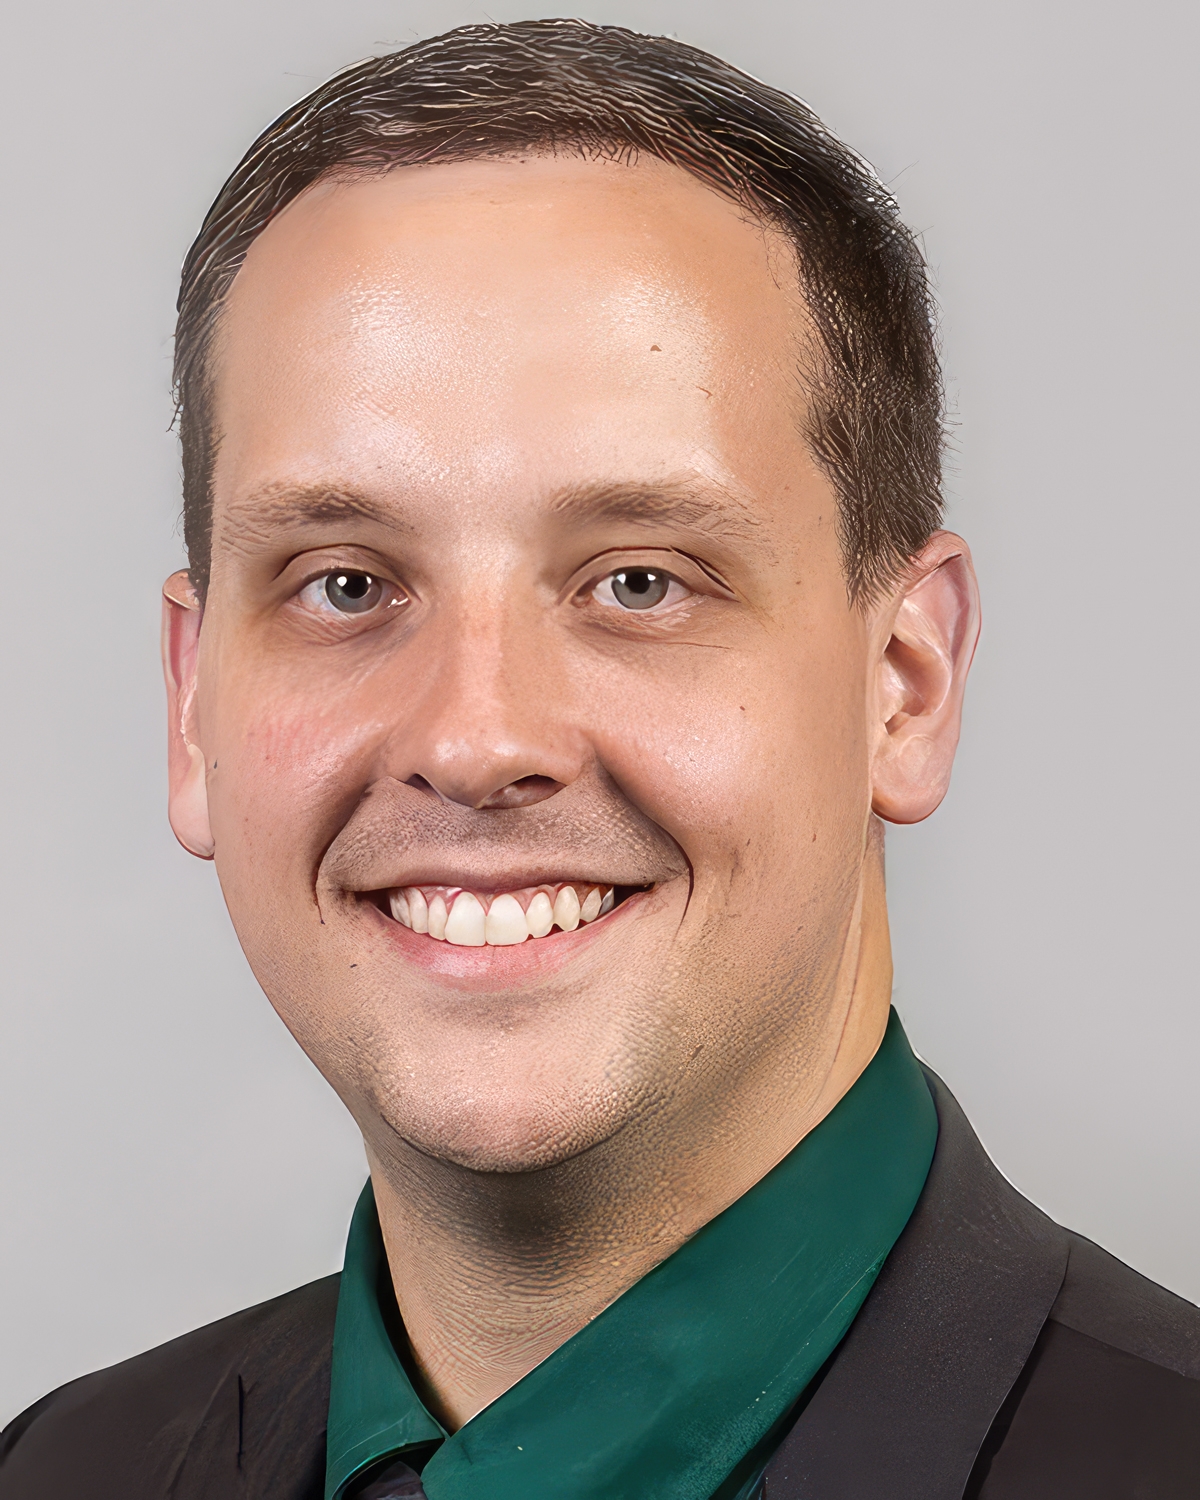 Jay W. McDaniel, Ph.D., assistant professor in the School of Electrical and Computer Engineering